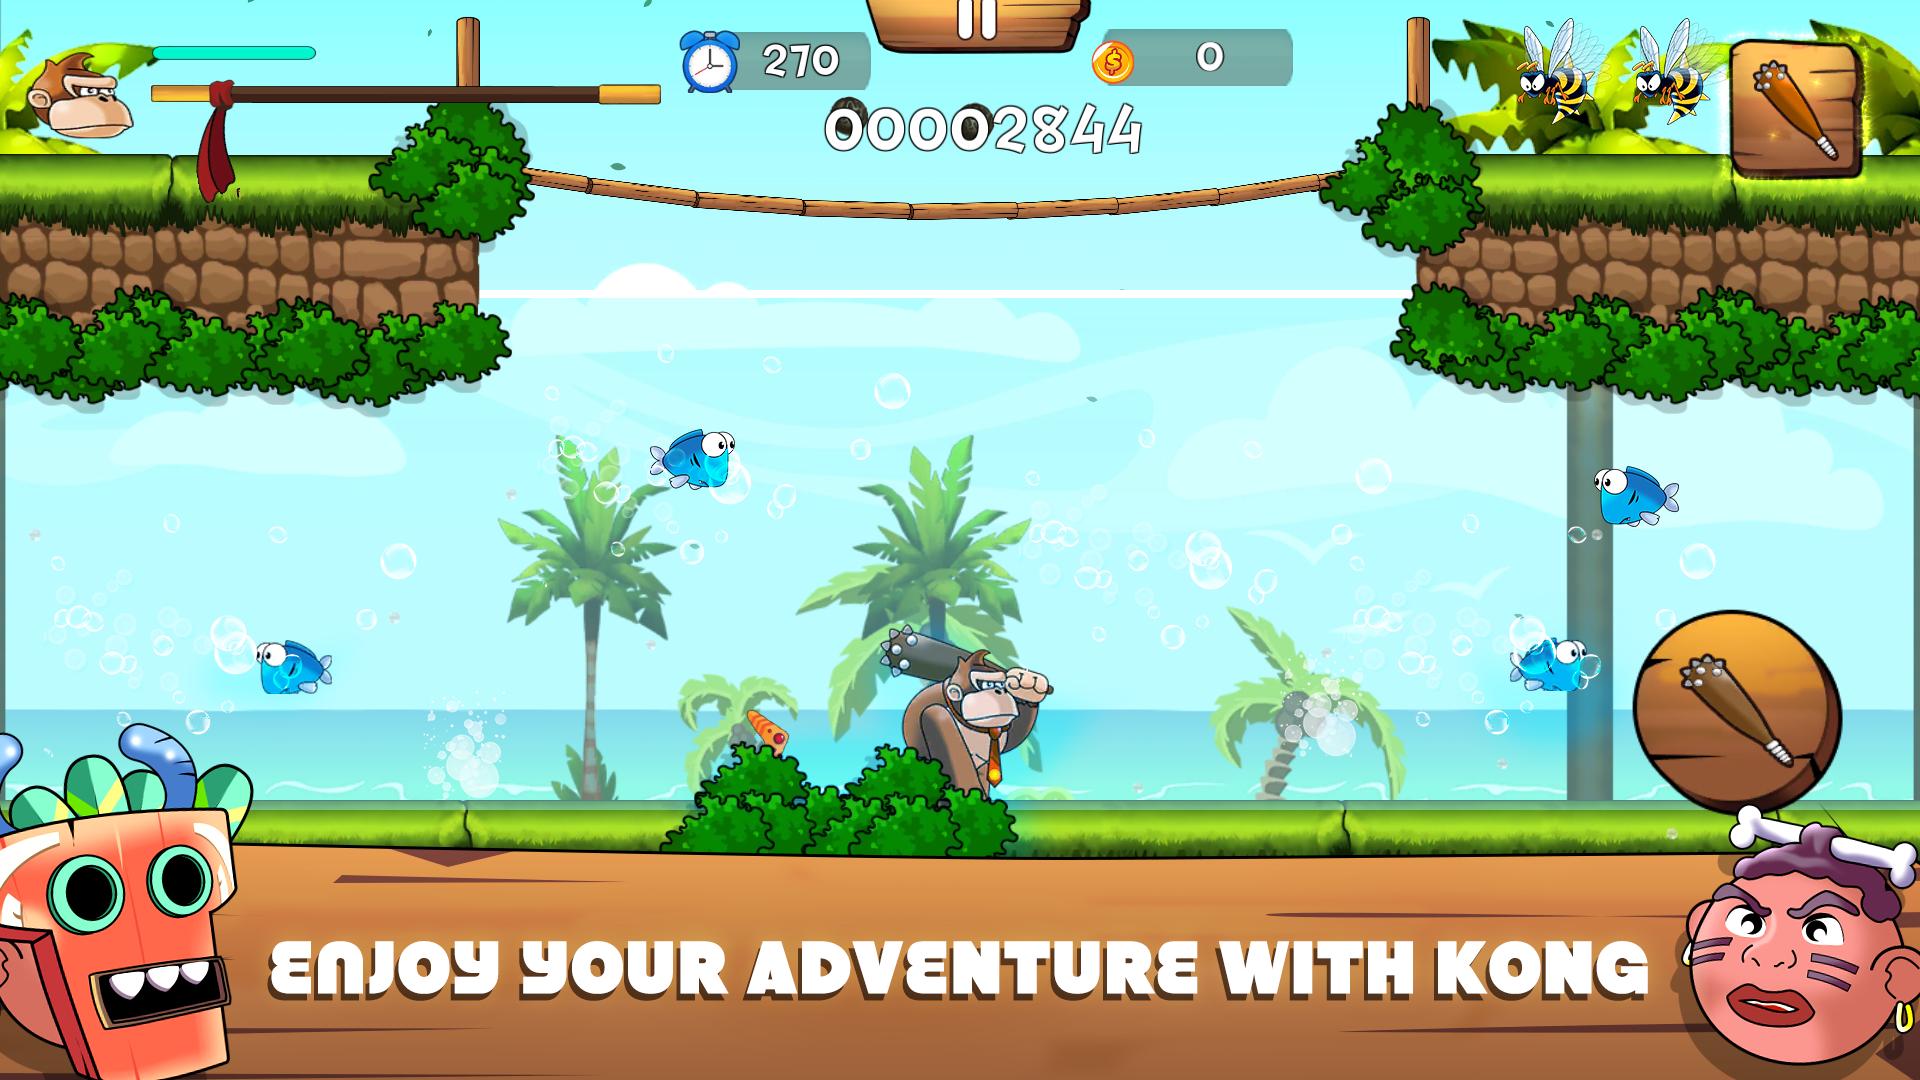 games similar to monkey quest